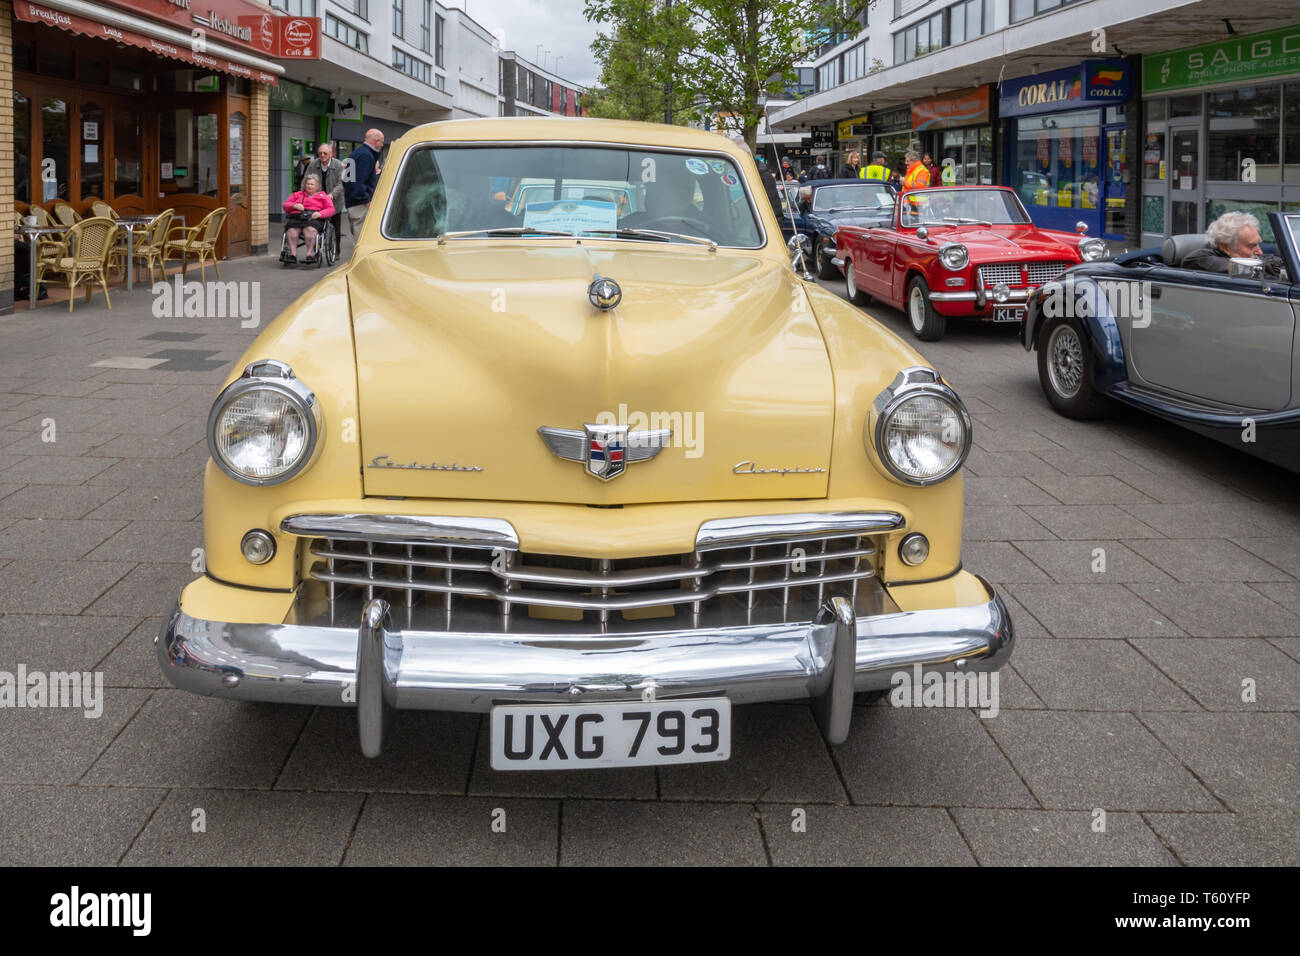 Yellow 1949 Studebaker Champion, an American vintage car at a classic motor vehicle show in the UK Stock Photo